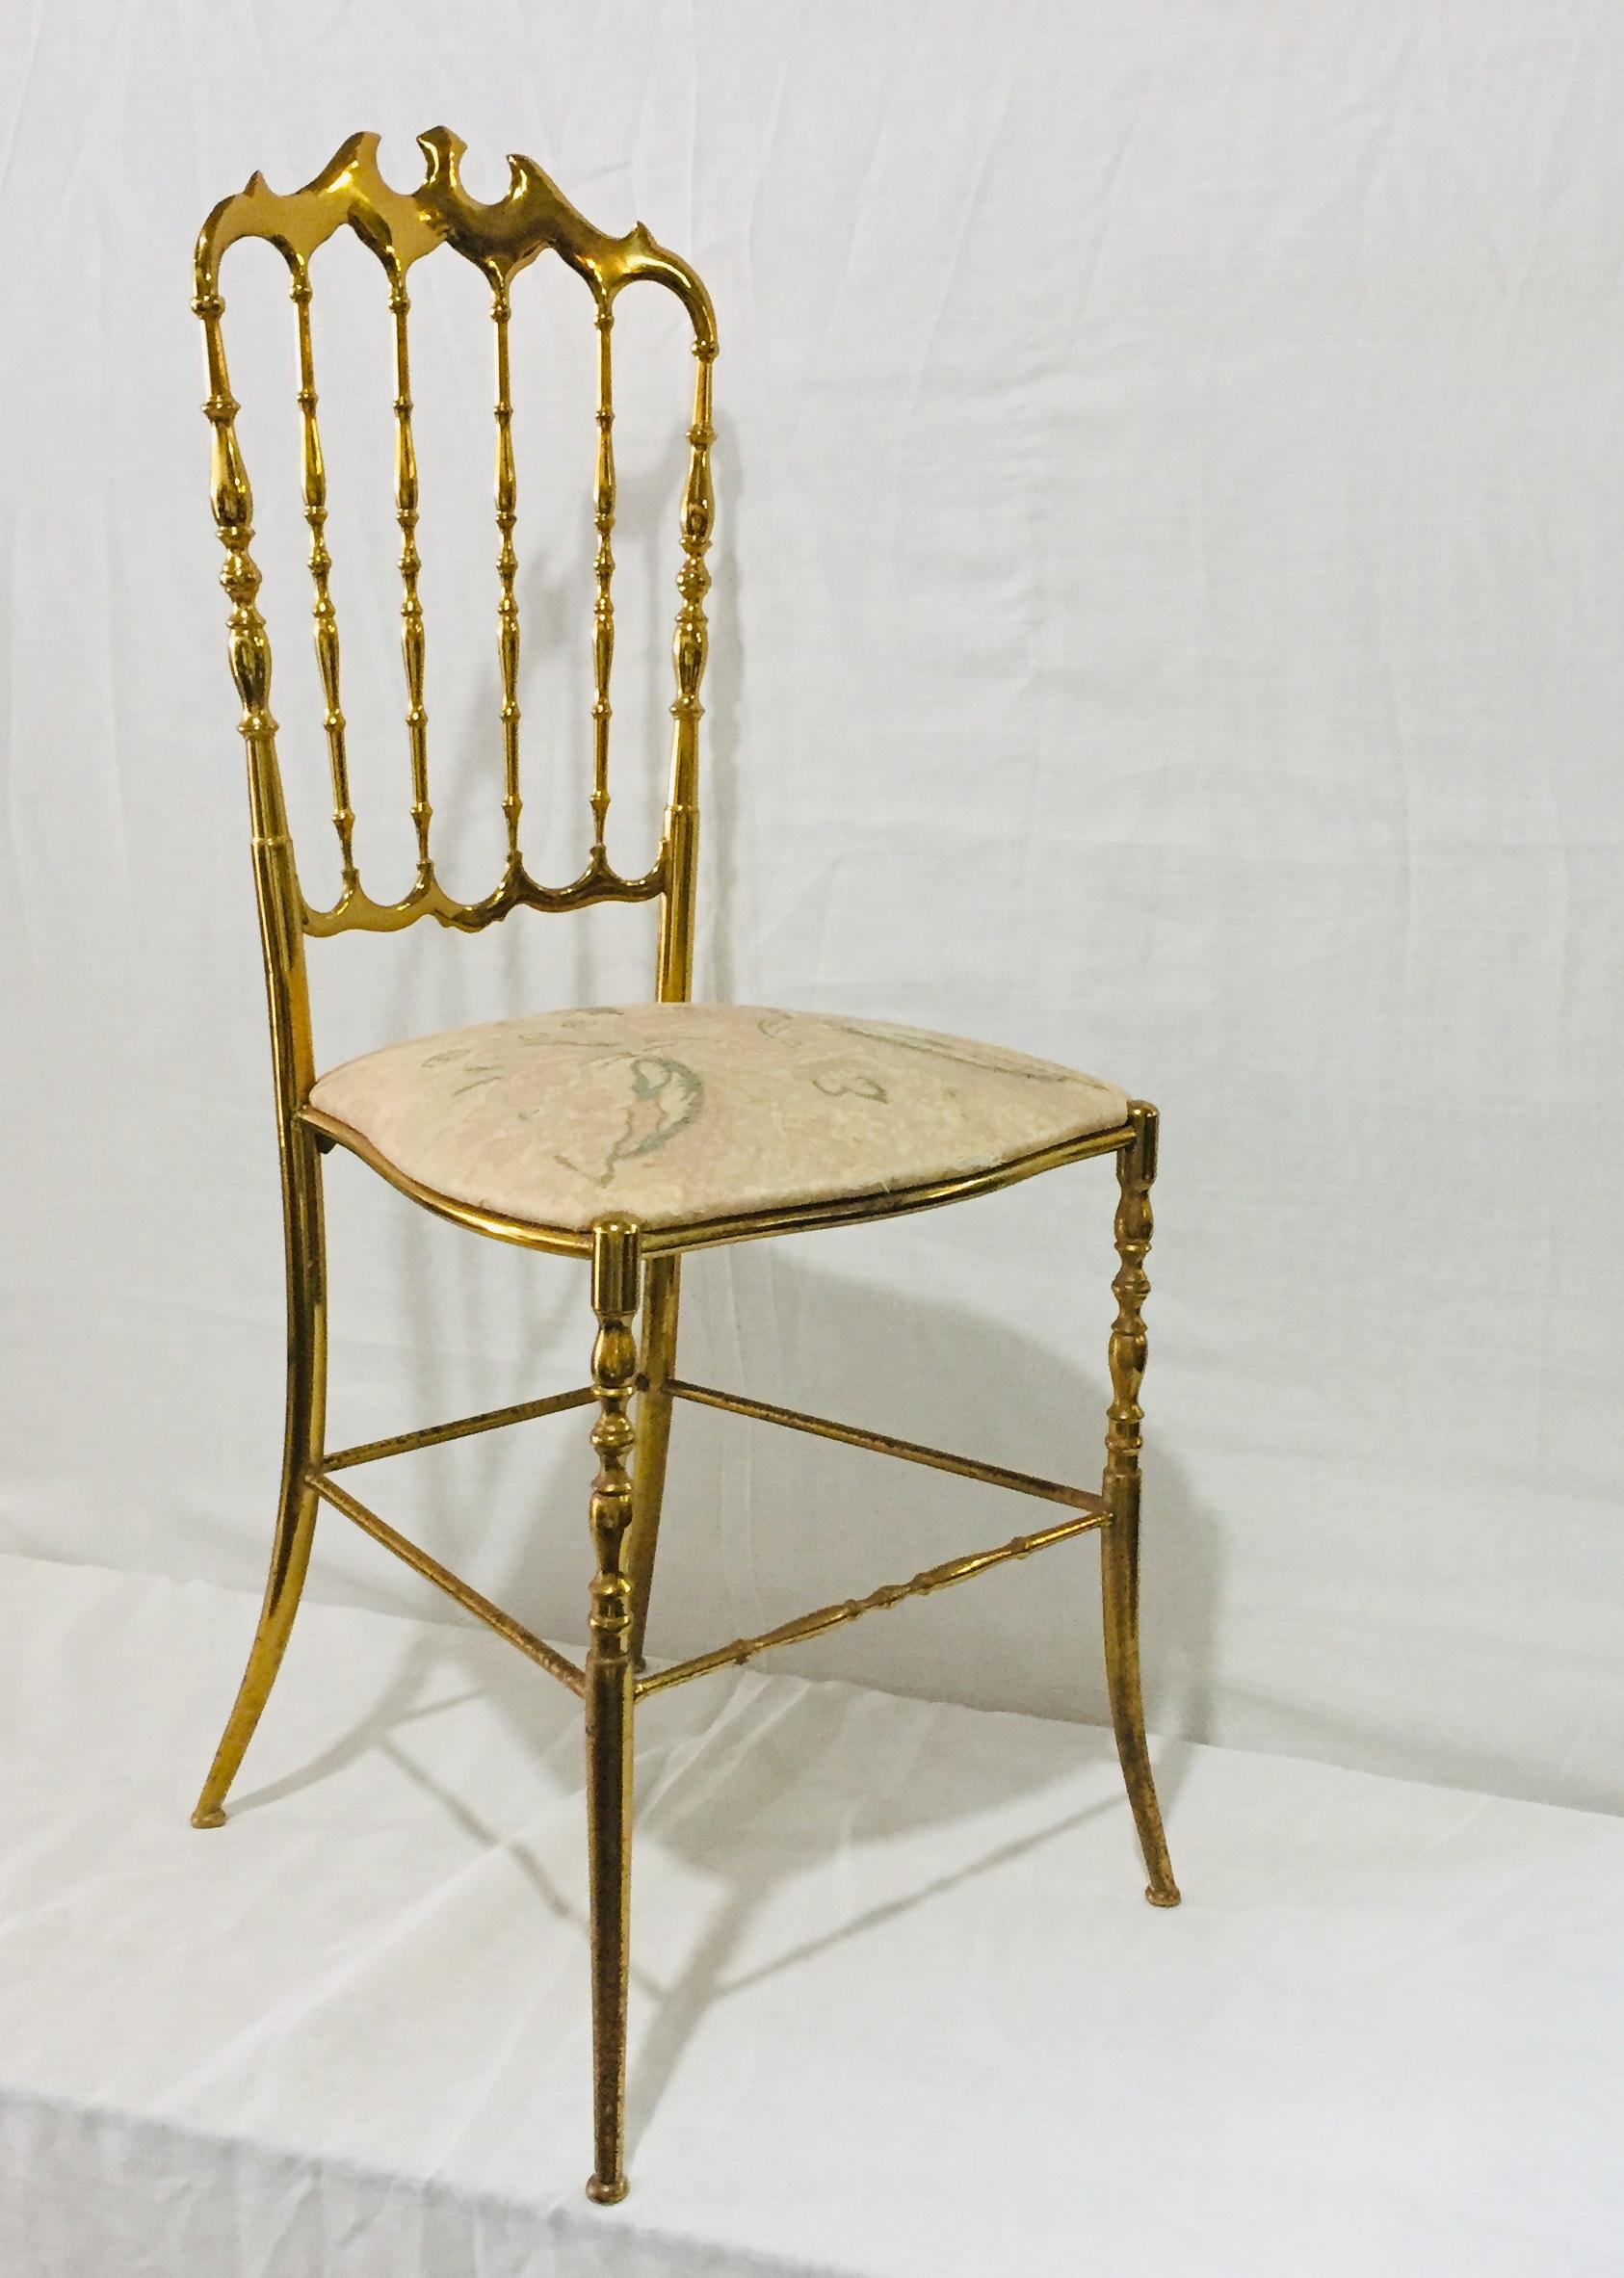 Mid-20th Century Mid-Century Modern Pair of Italian Chiavari Opéra Chairs in Solid Polished Brass For Sale